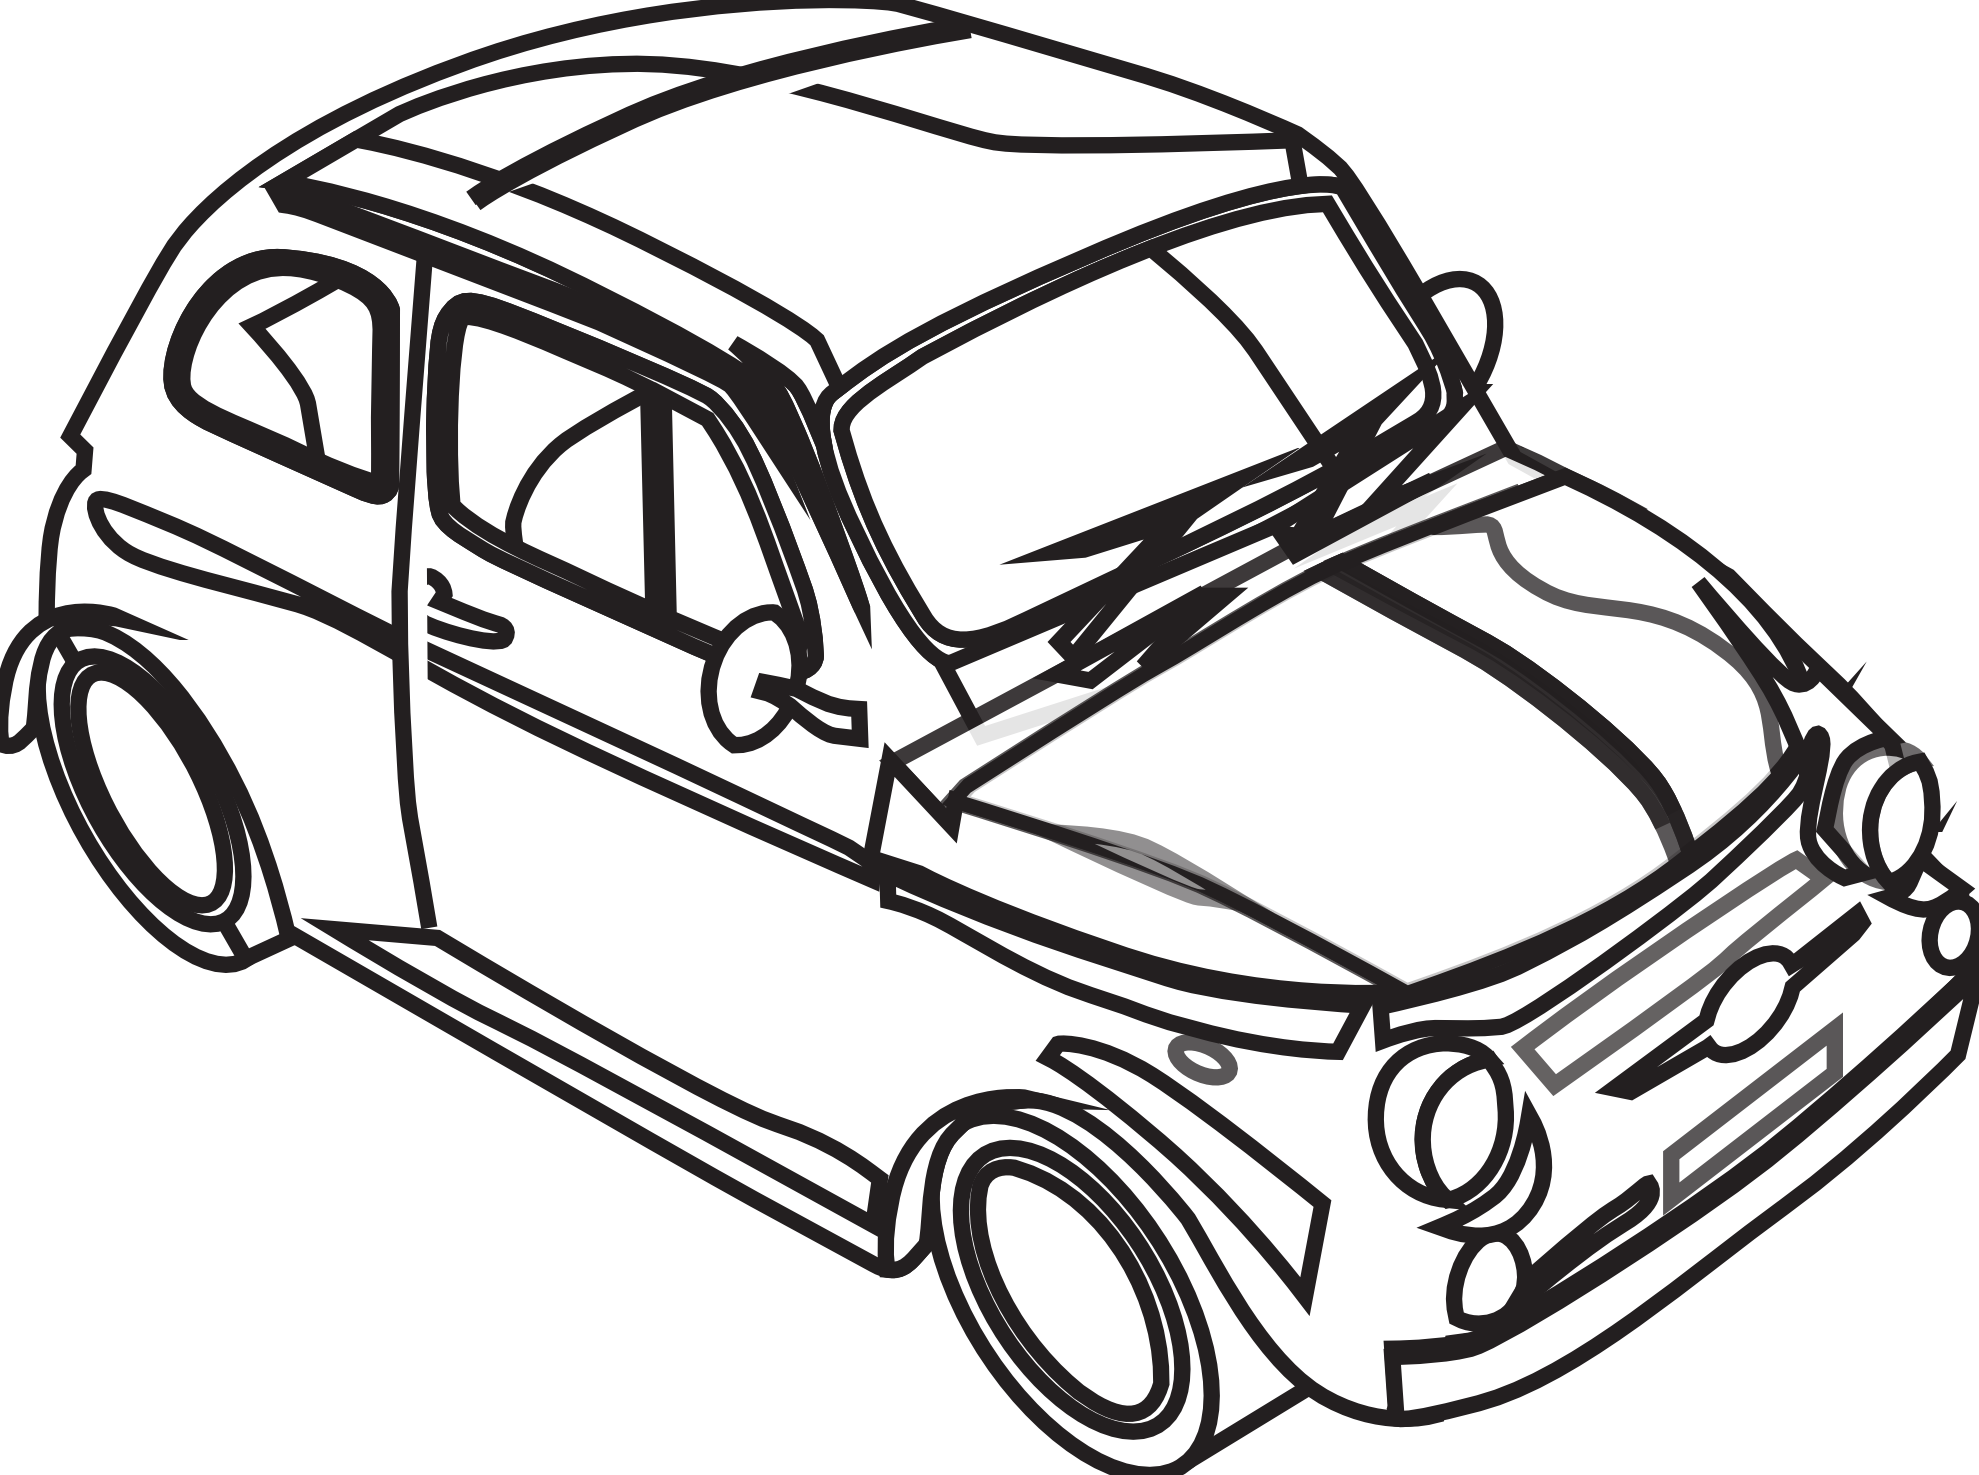 Car drawing clipart black and white